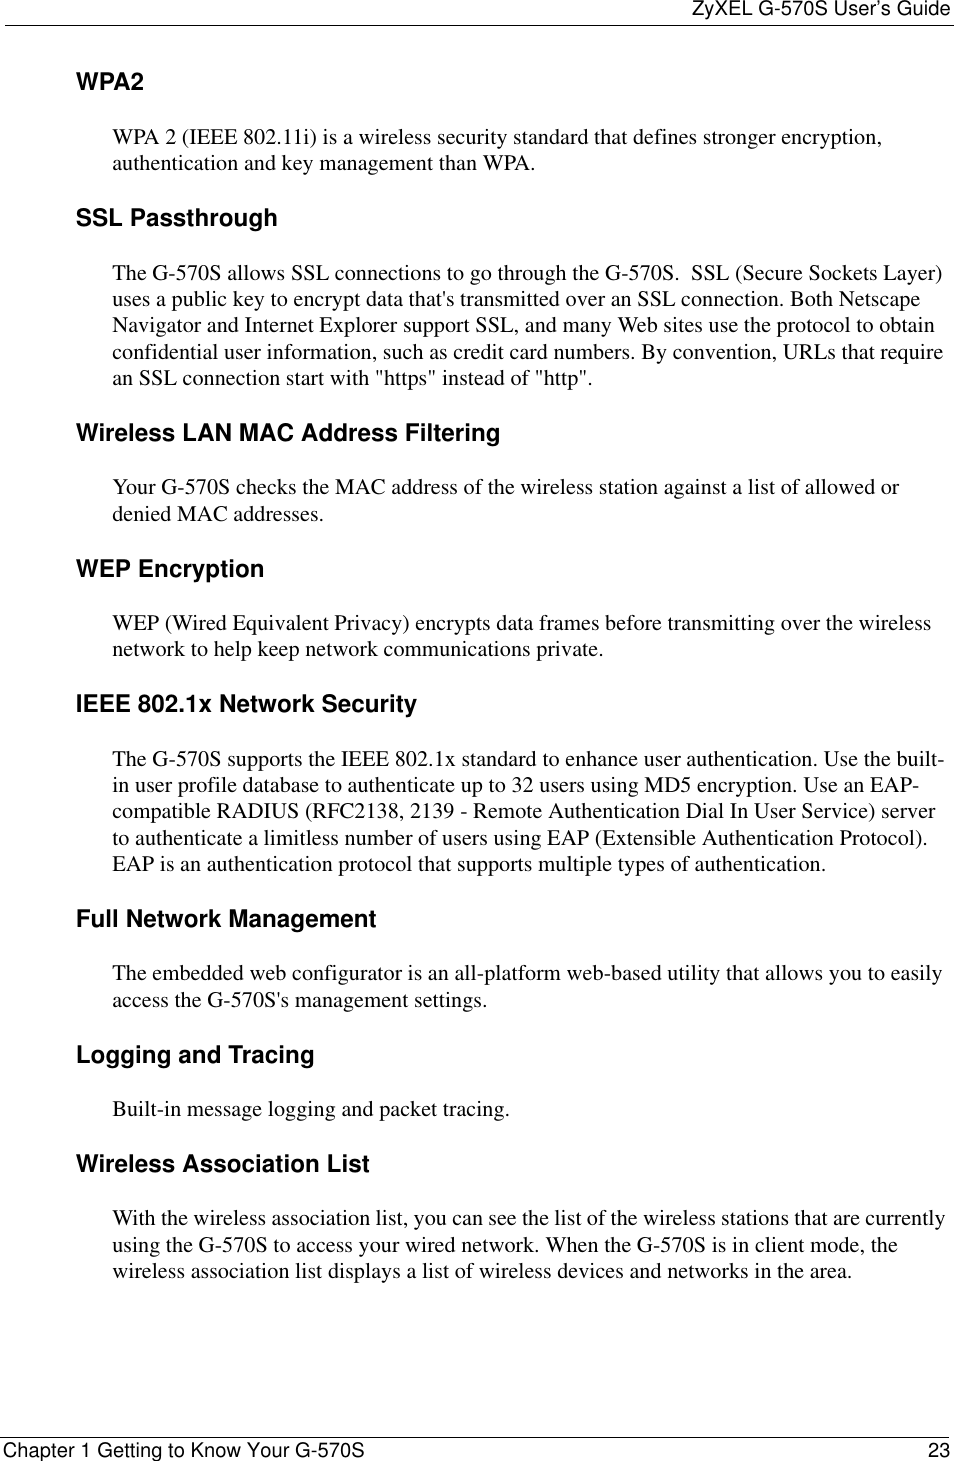 ZyXEL G-570S User’s GuideChapter 1 Getting to Know Your G-570S 23WPA2WPA 2 (IEEE 802.11i) is a wireless security standard that defines stronger encryption, authentication and key management than WPA.SSL PassthroughThe G-570S allows SSL connections to go through the G-570S.  SSL (Secure Sockets Layer) uses a public key to encrypt data that&apos;s transmitted over an SSL connection. Both Netscape Navigator and Internet Explorer support SSL, and many Web sites use the protocol to obtain confidential user information, such as credit card numbers. By convention, URLs that require an SSL connection start with &quot;https&quot; instead of &quot;http&quot;. Wireless LAN MAC Address FilteringYour G-570S checks the MAC address of the wireless station against a list of allowed or denied MAC addresses.WEP EncryptionWEP (Wired Equivalent Privacy) encrypts data frames before transmitting over the wireless network to help keep network communications private.IEEE 802.1x Network SecurityThe G-570S supports the IEEE 802.1x standard to enhance user authentication. Use the built-in user profile database to authenticate up to 32 users using MD5 encryption. Use an EAP-compatible RADIUS (RFC2138, 2139 - Remote Authentication Dial In User Service) server to authenticate a limitless number of users using EAP (Extensible Authentication Protocol). EAP is an authentication protocol that supports multiple types of authentication.Full Network Management The embedded web configurator is an all-platform web-based utility that allows you to easily access the G-570S&apos;s management settings. Logging and TracingBuilt-in message logging and packet tracing.Wireless Association List With the wireless association list, you can see the list of the wireless stations that are currently using the G-570S to access your wired network. When the G-570S is in client mode, the wireless association list displays a list of wireless devices and networks in the area.